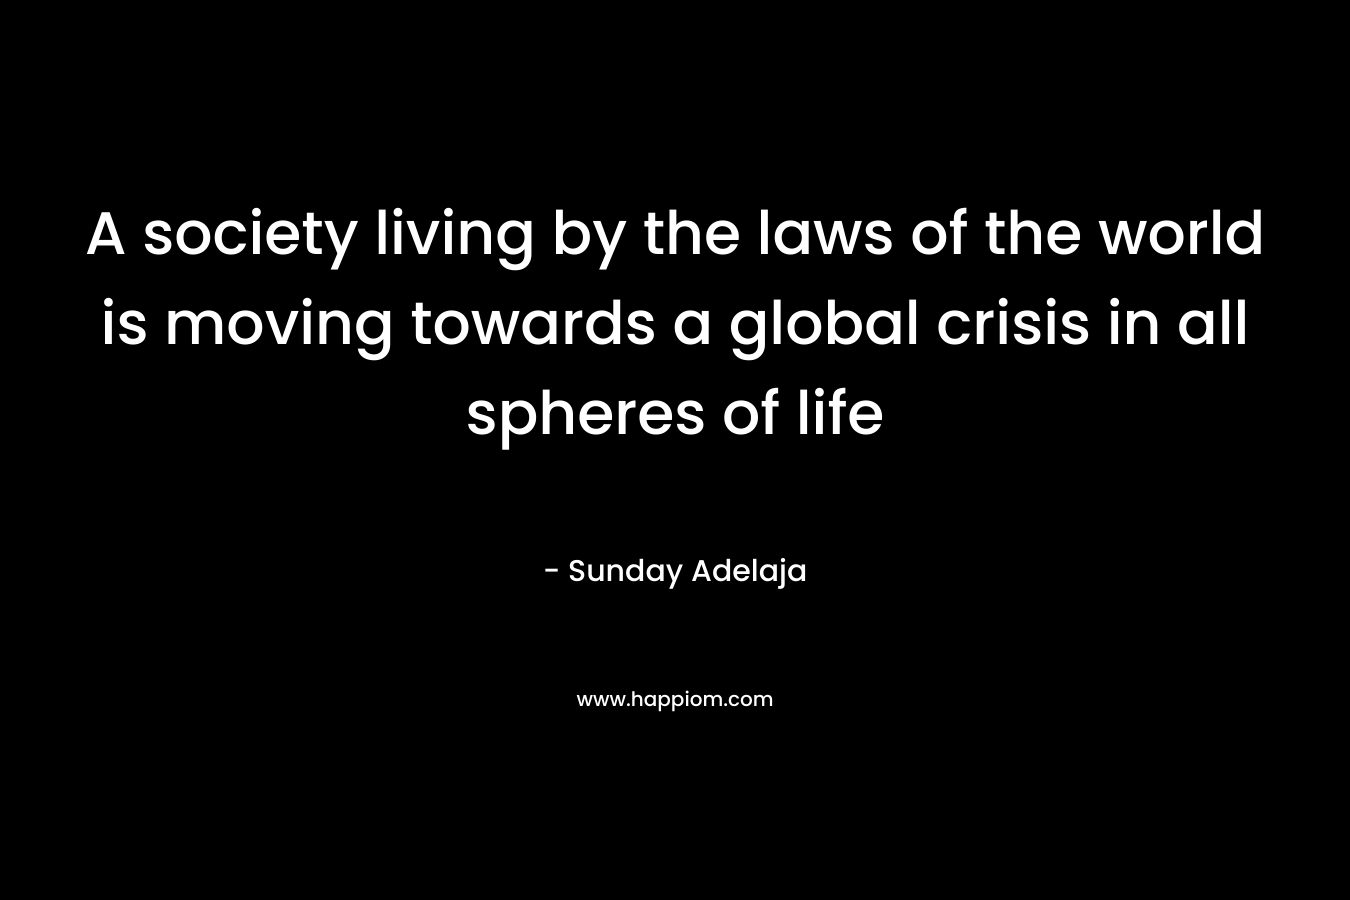 A society living by the laws of the world is moving towards a global crisis in all spheres of life